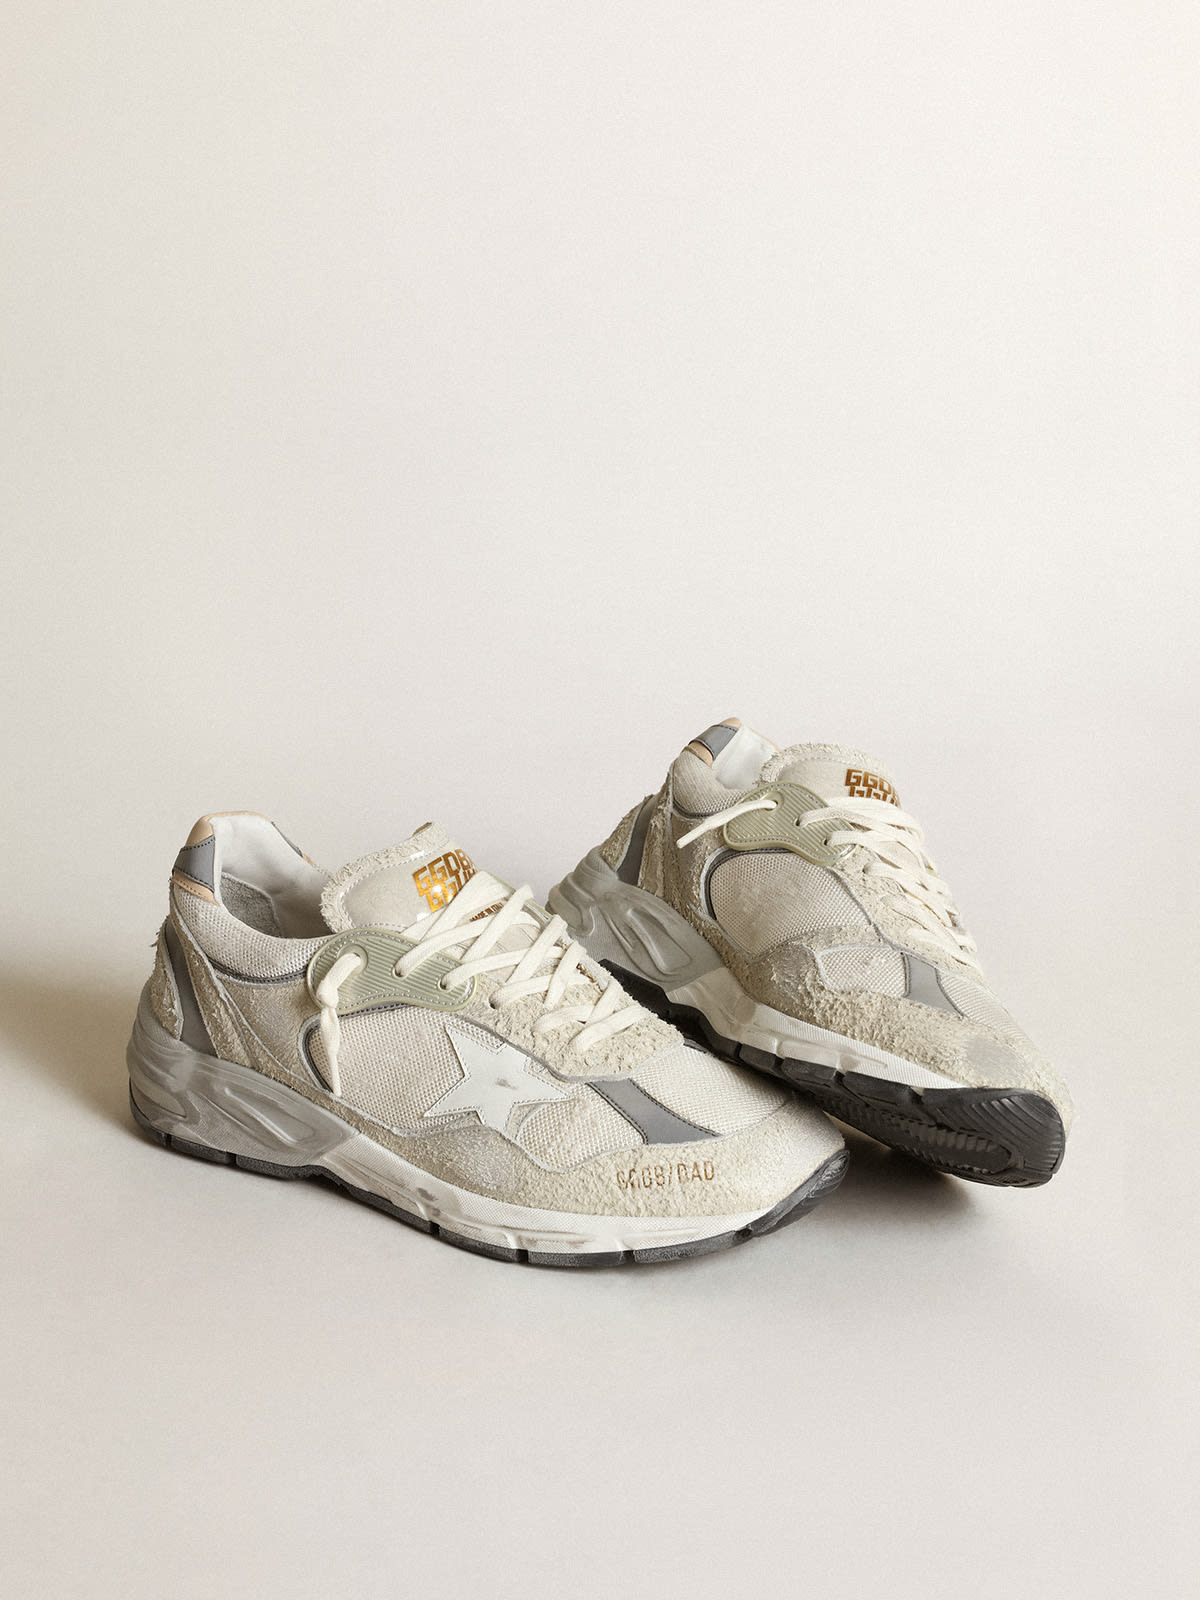 Golden Goose - Men's Dad-Star in white and gray suede and white leather star in 